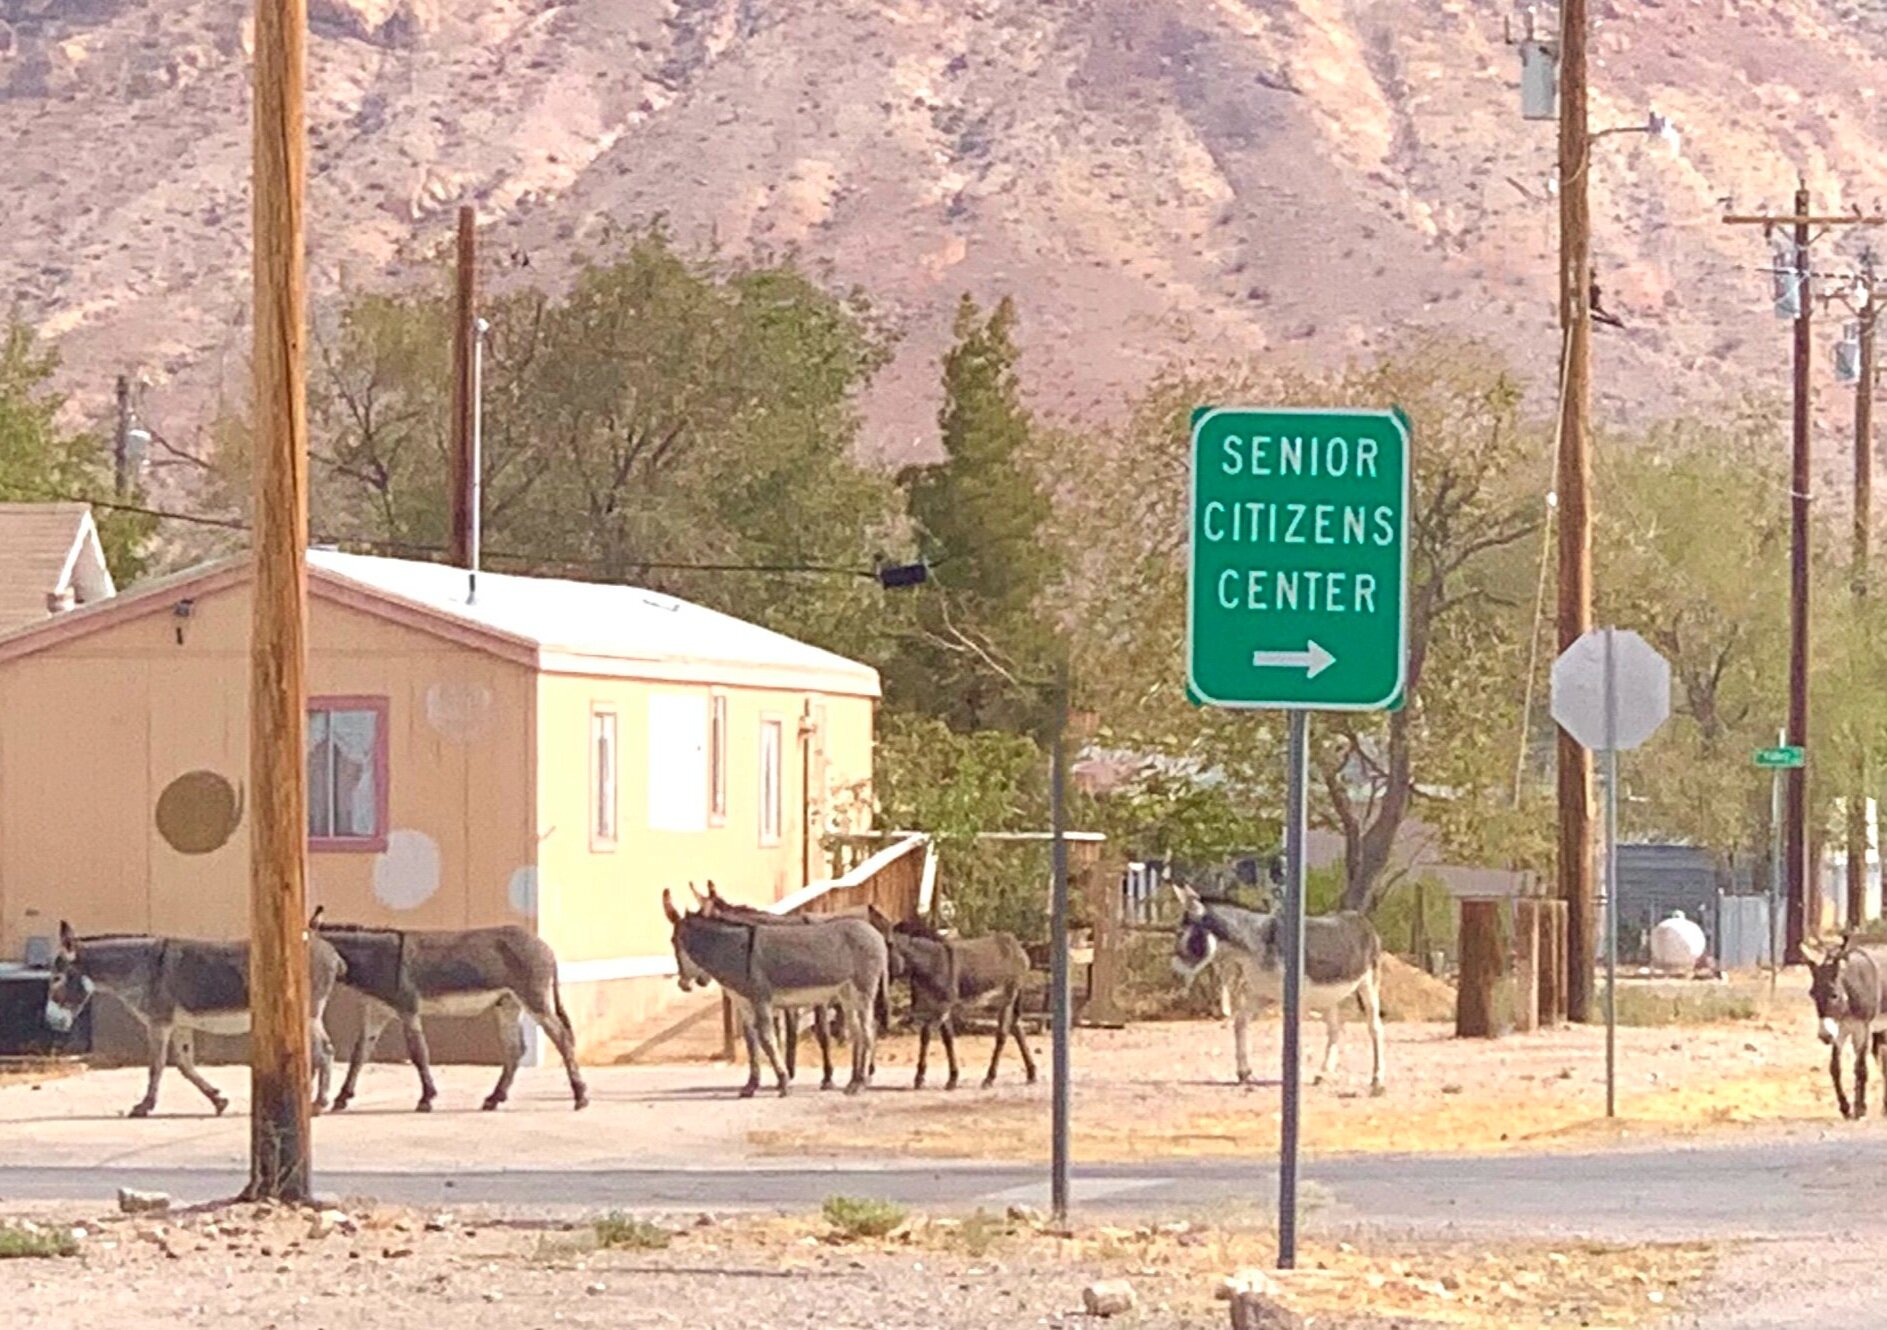  Think you have problems with asses around you? You may not get much sympathy from some of the residents of  Beatty, Nevada . This small town is known for its wild burro (over) population. The town has historically embraced the burros as symbols of t